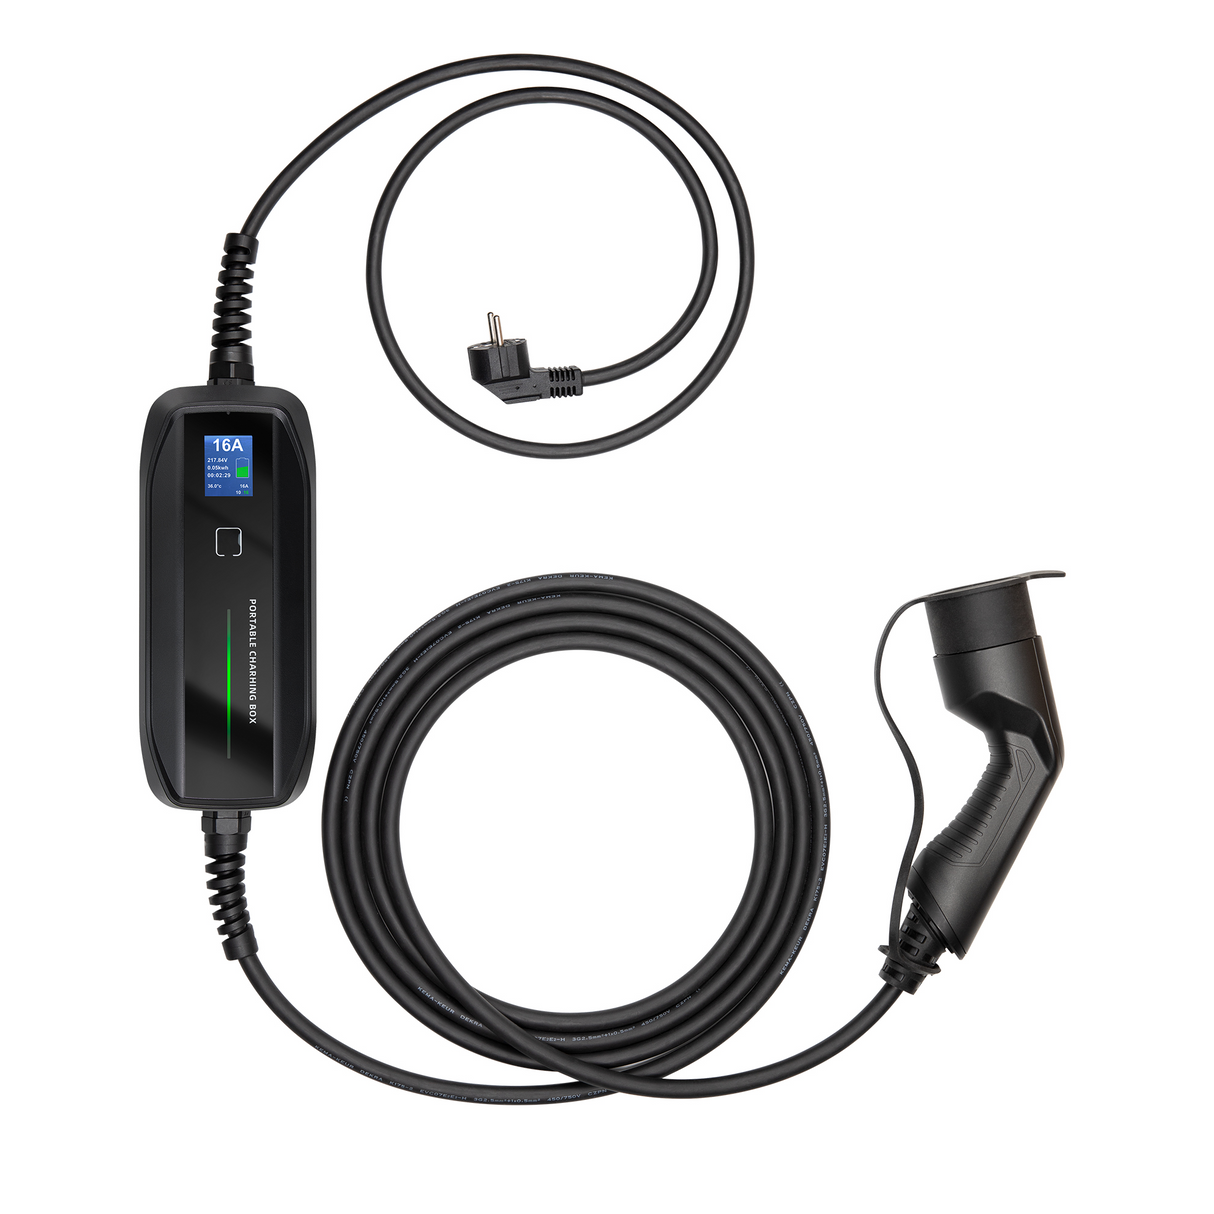 Mobile Charger Mini Cooper - Besen with LCD - Type 2 to Schuko